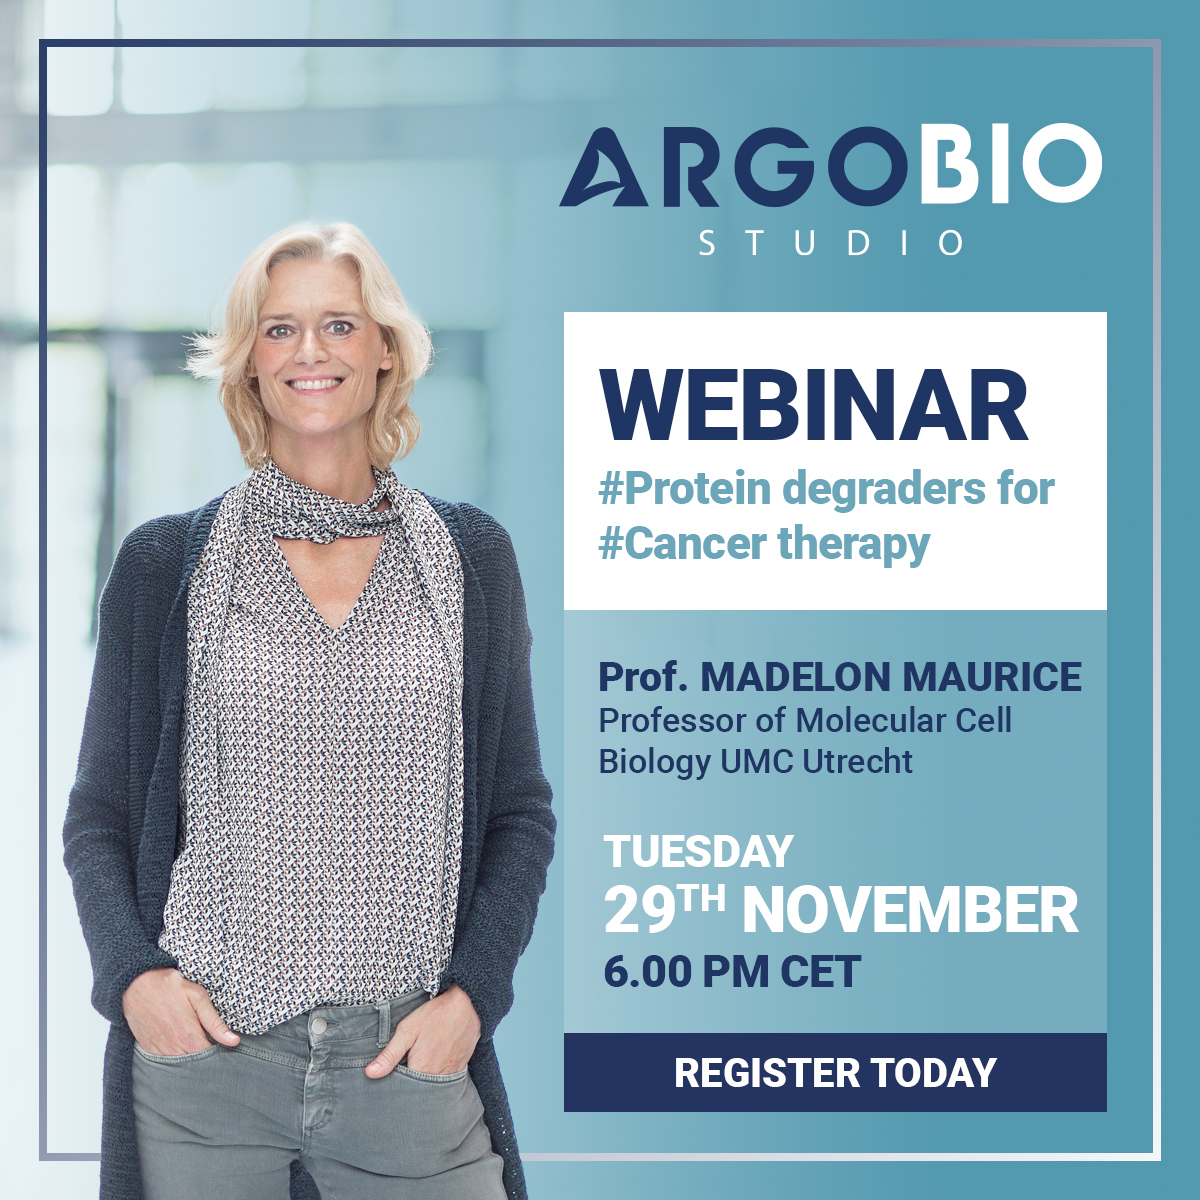 #ARGOBIO’s WEBINAR : Prof. @MadelonMaurice  will present “Leveraging a novel targeted membrane protein degradation approach in cancer therapy”, 29th November at 6 pm CET.
Register : app.livestorm.co/p/e972734b-e5b…

#membraneprotein #bispecificantibody #antibody #LaigoBio